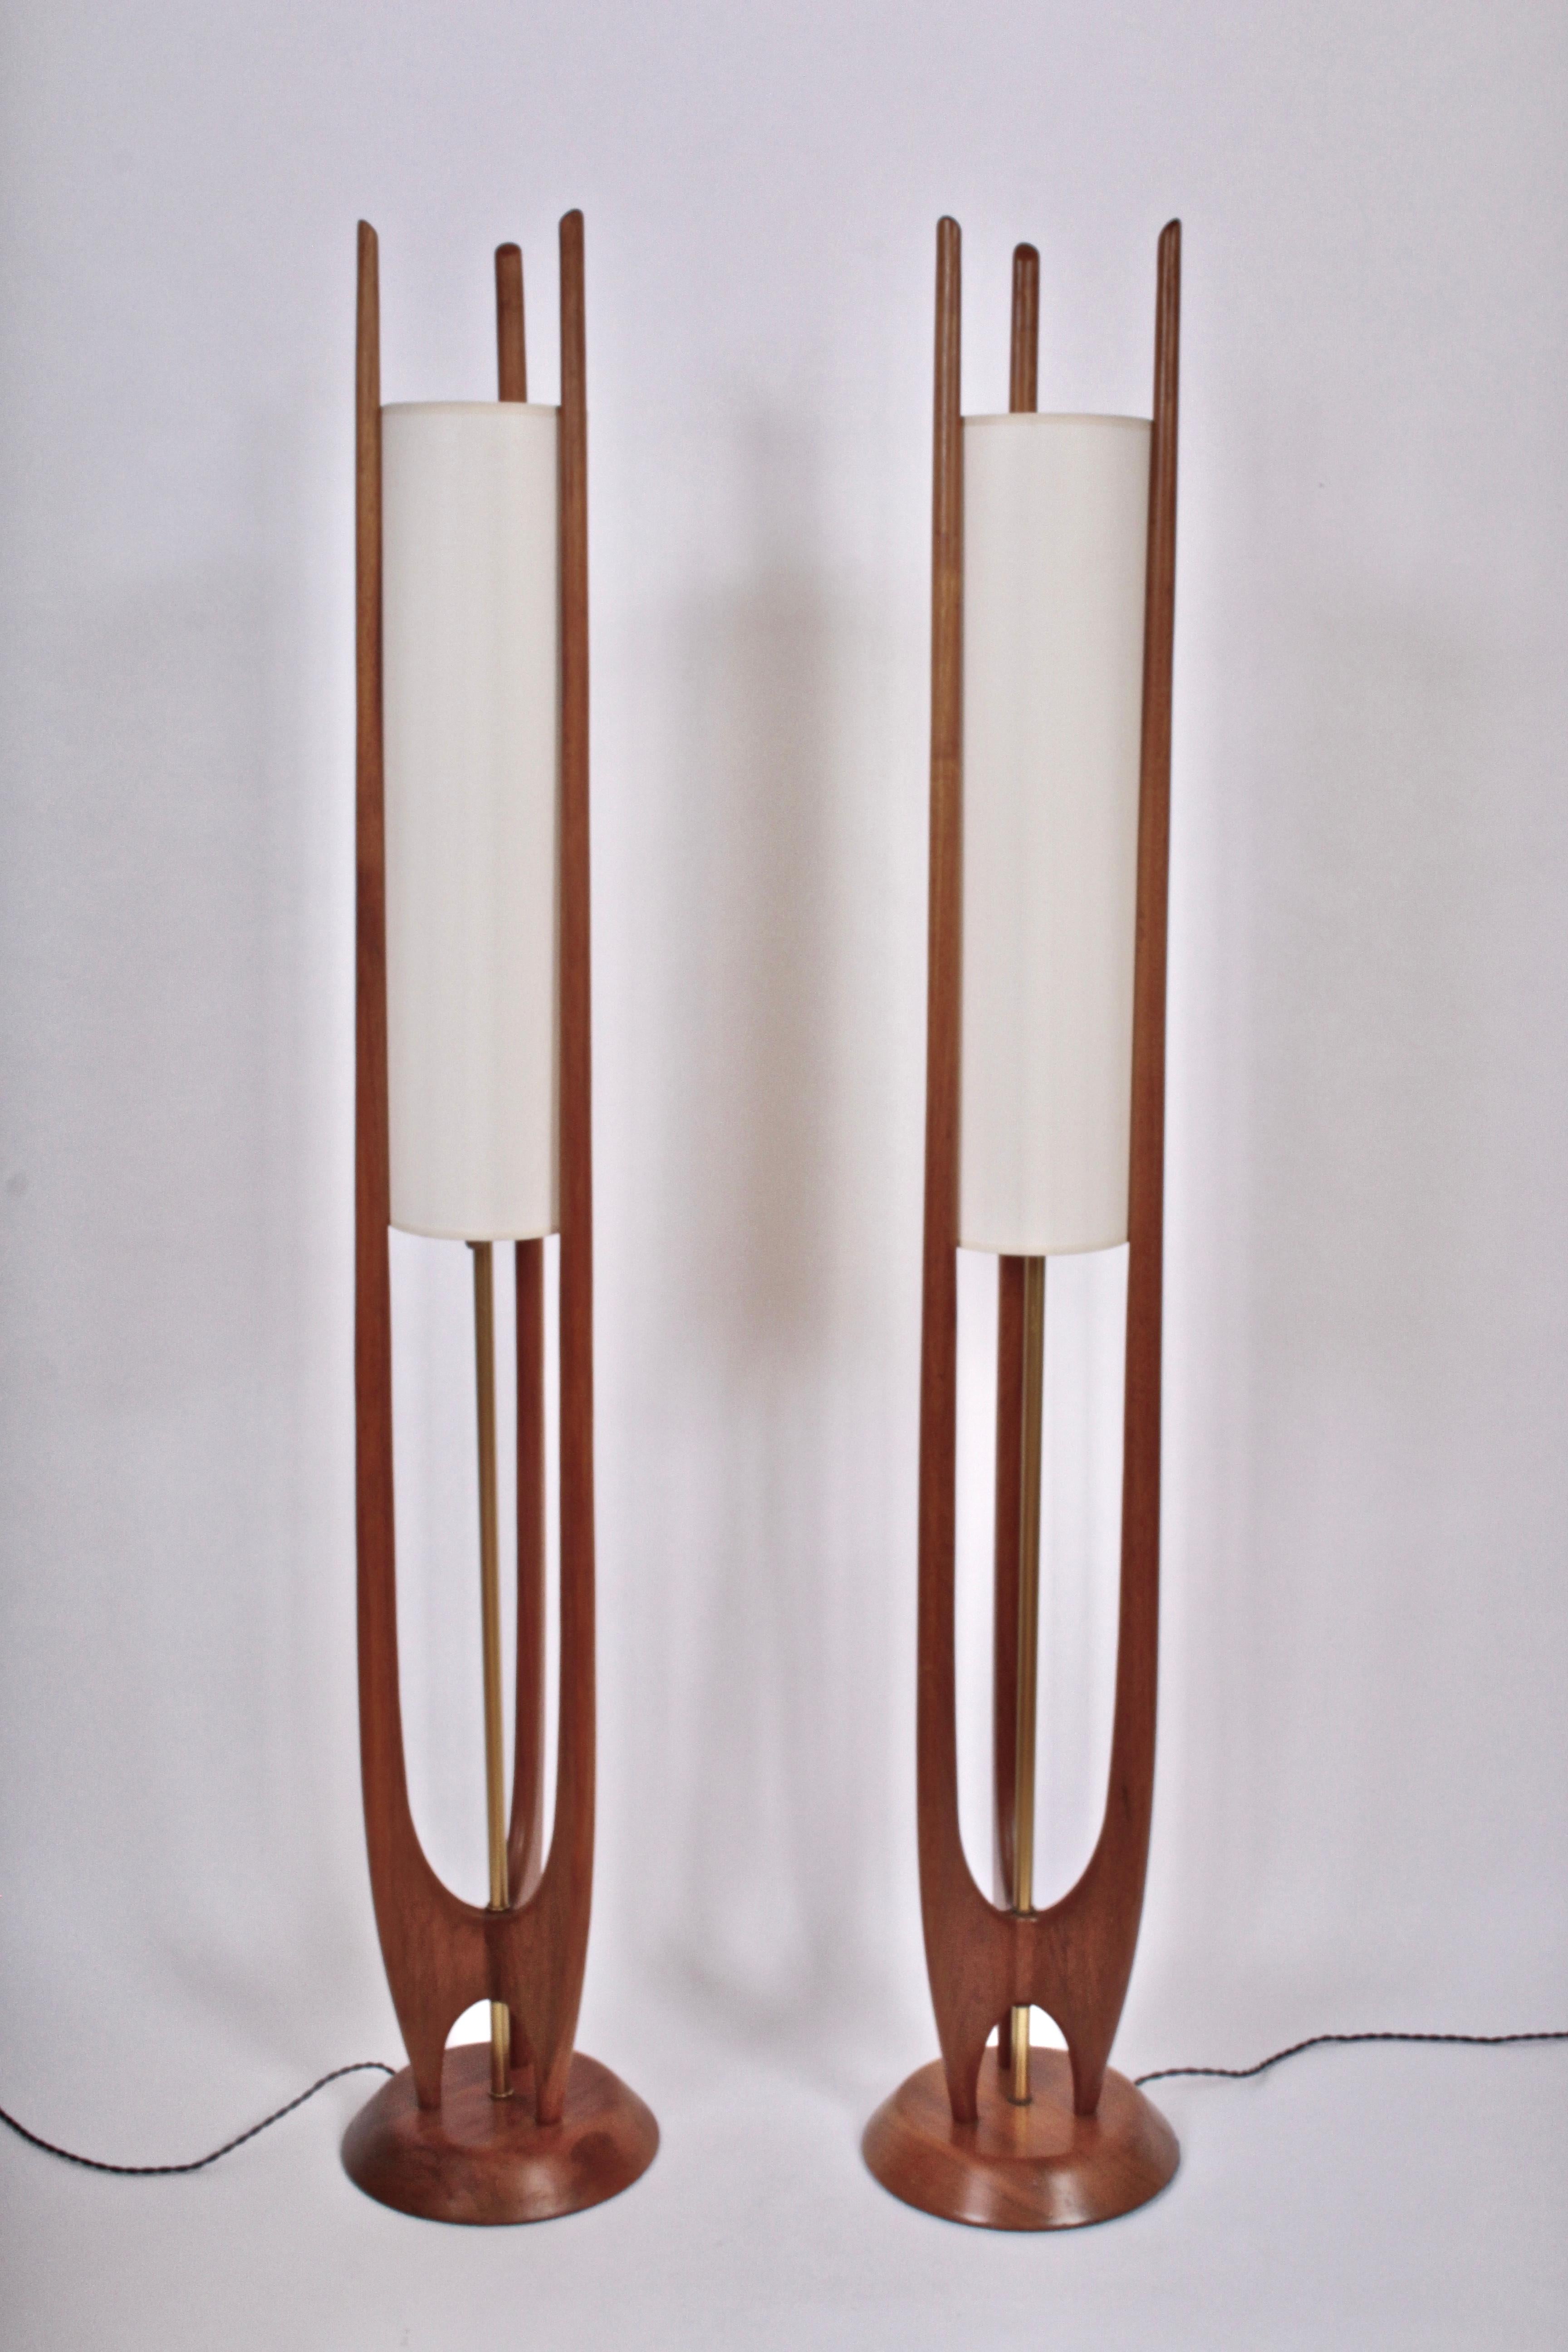 Pair of Organic Modernist Modeline Lamp Co. of California Walnut and Brass detailed Floor Lamps with new 24 H x 6 D White linen shades, circa 1960. Rewired with new Brass hardware and Black braided cloth cord.